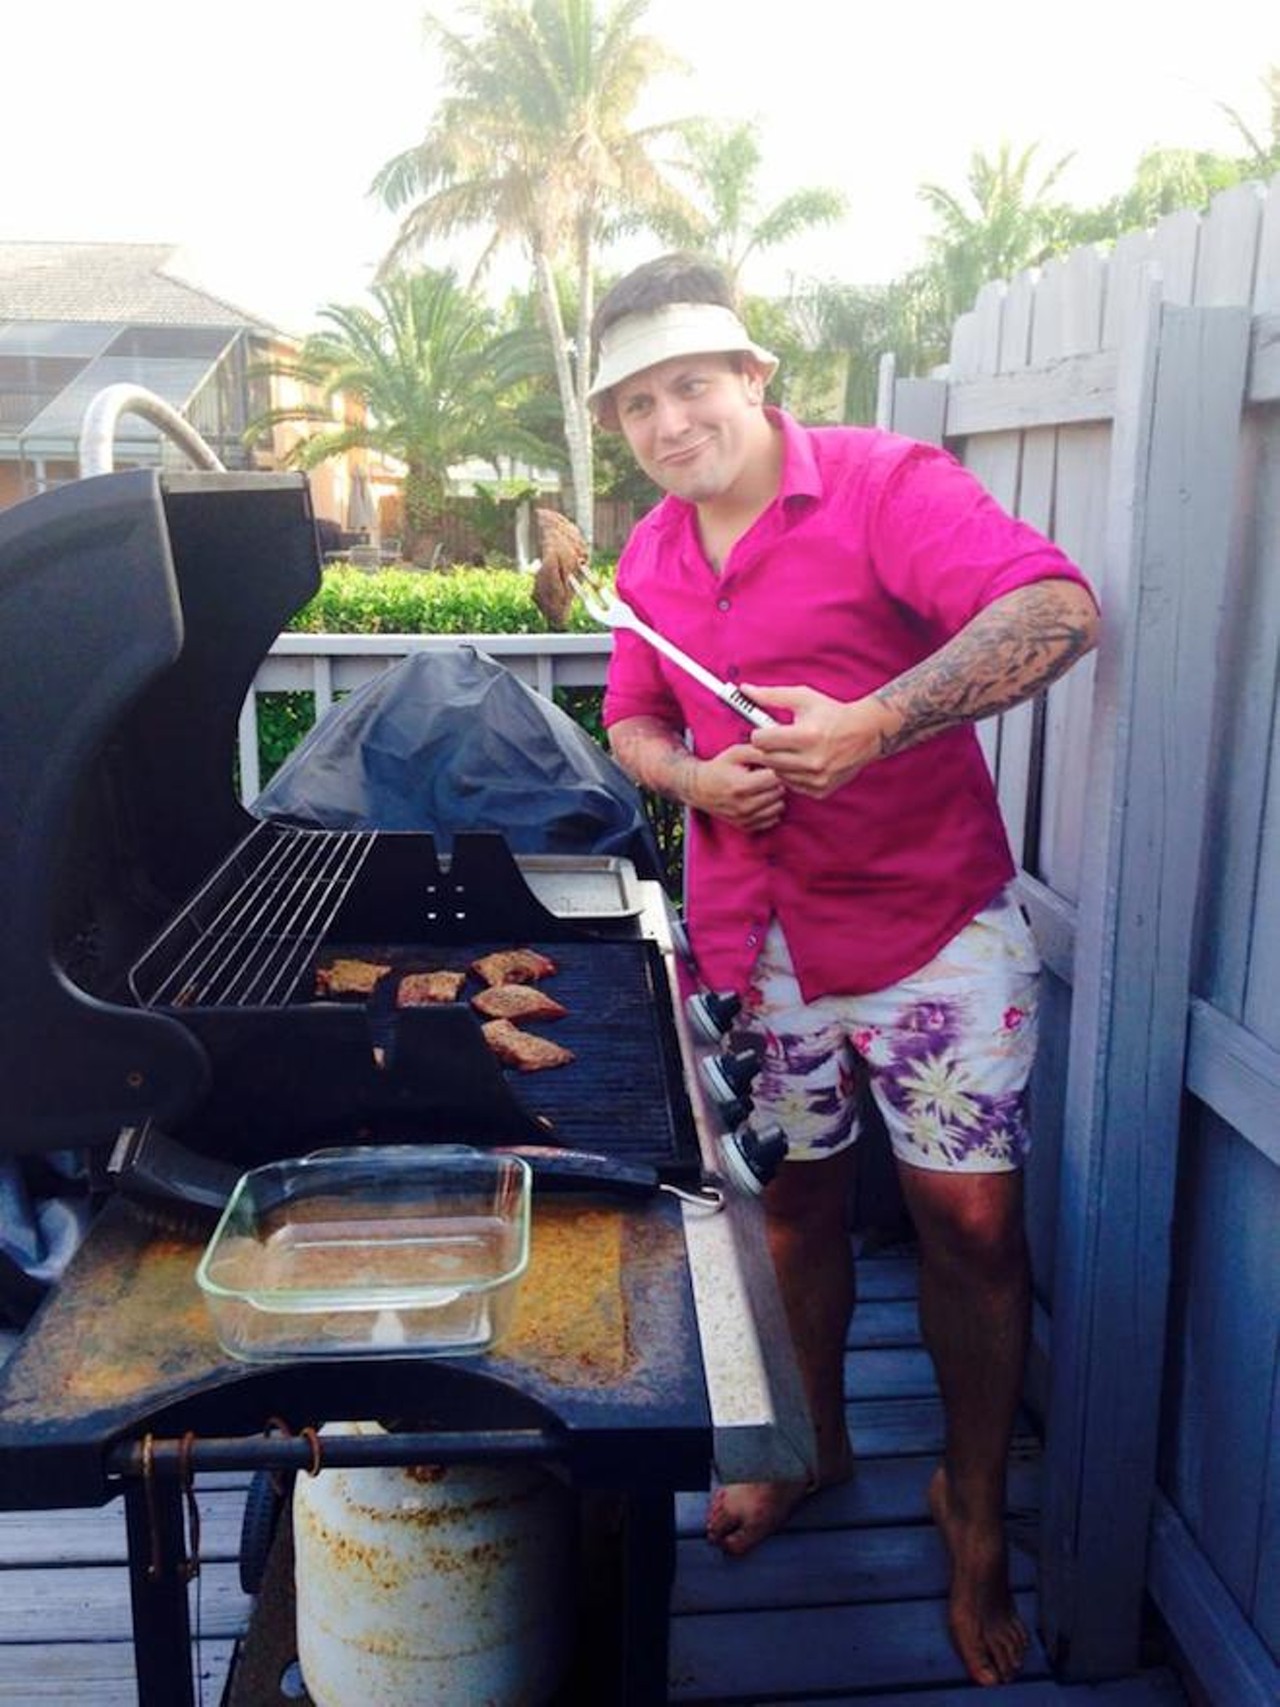 Our creative director grilling like a weird Florida dad.